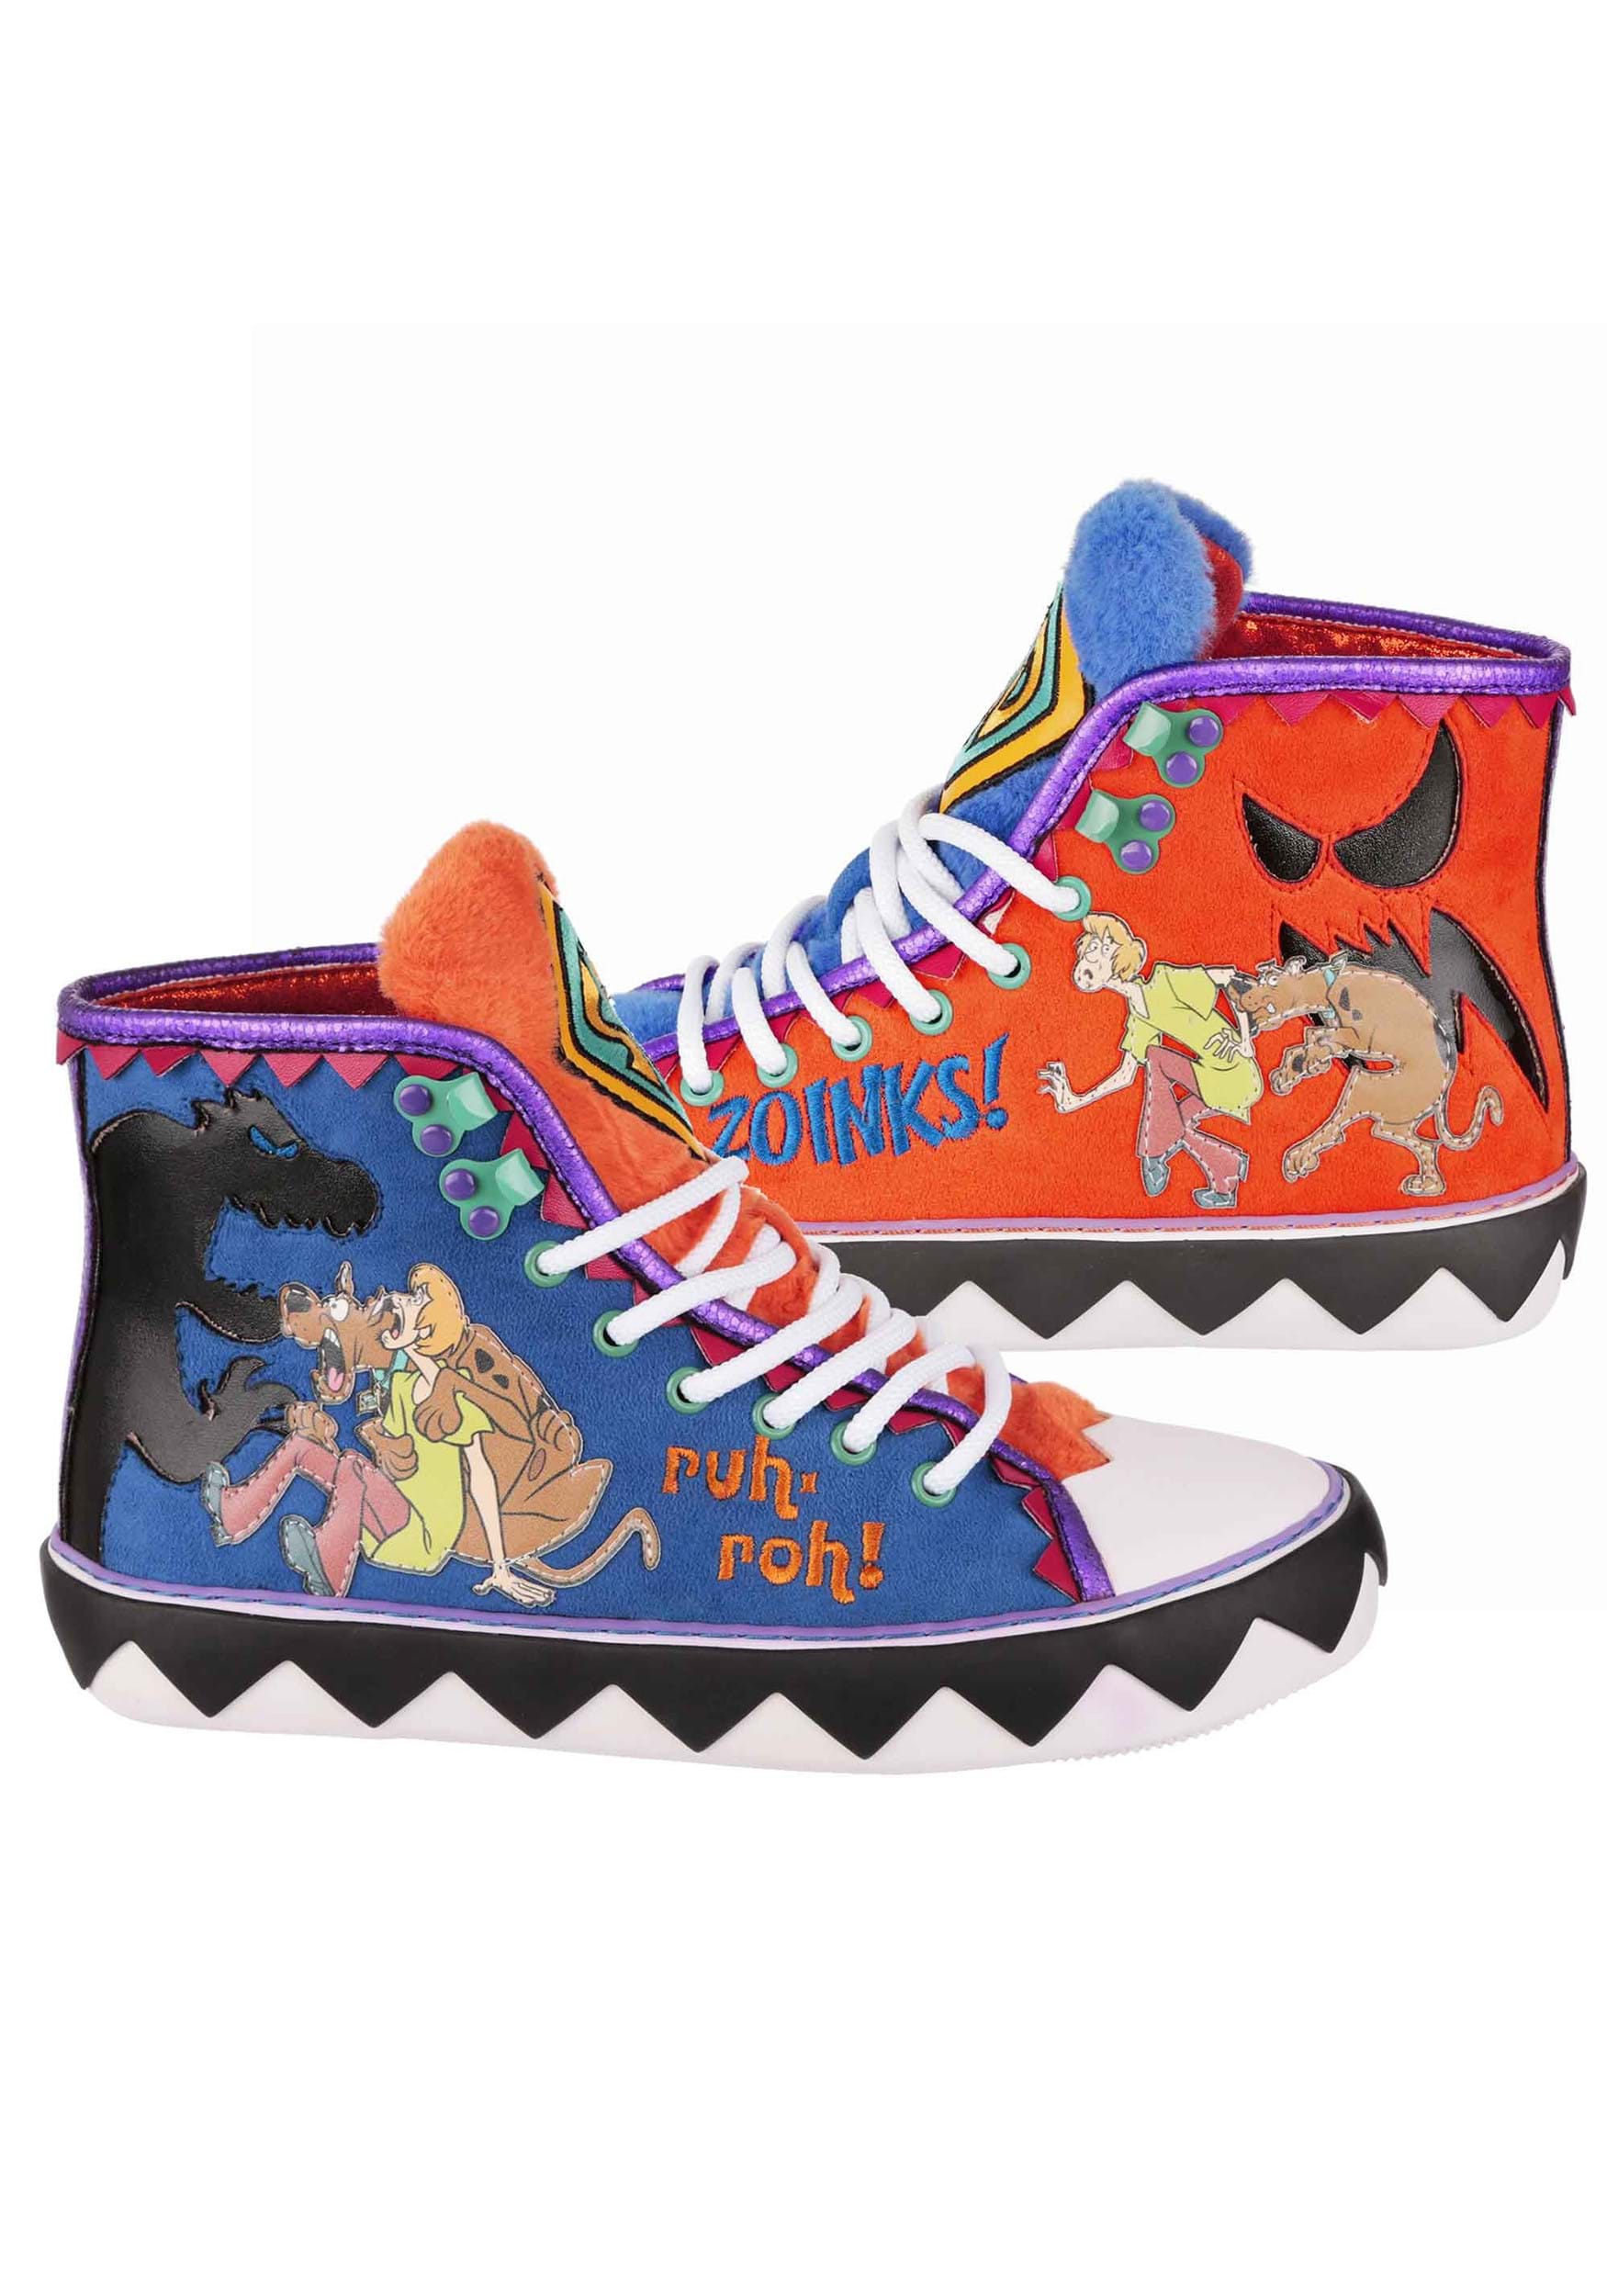 Image of Irregular Choice Scooby Doo Zoinks Sneakers ID IRR4125-41A-14